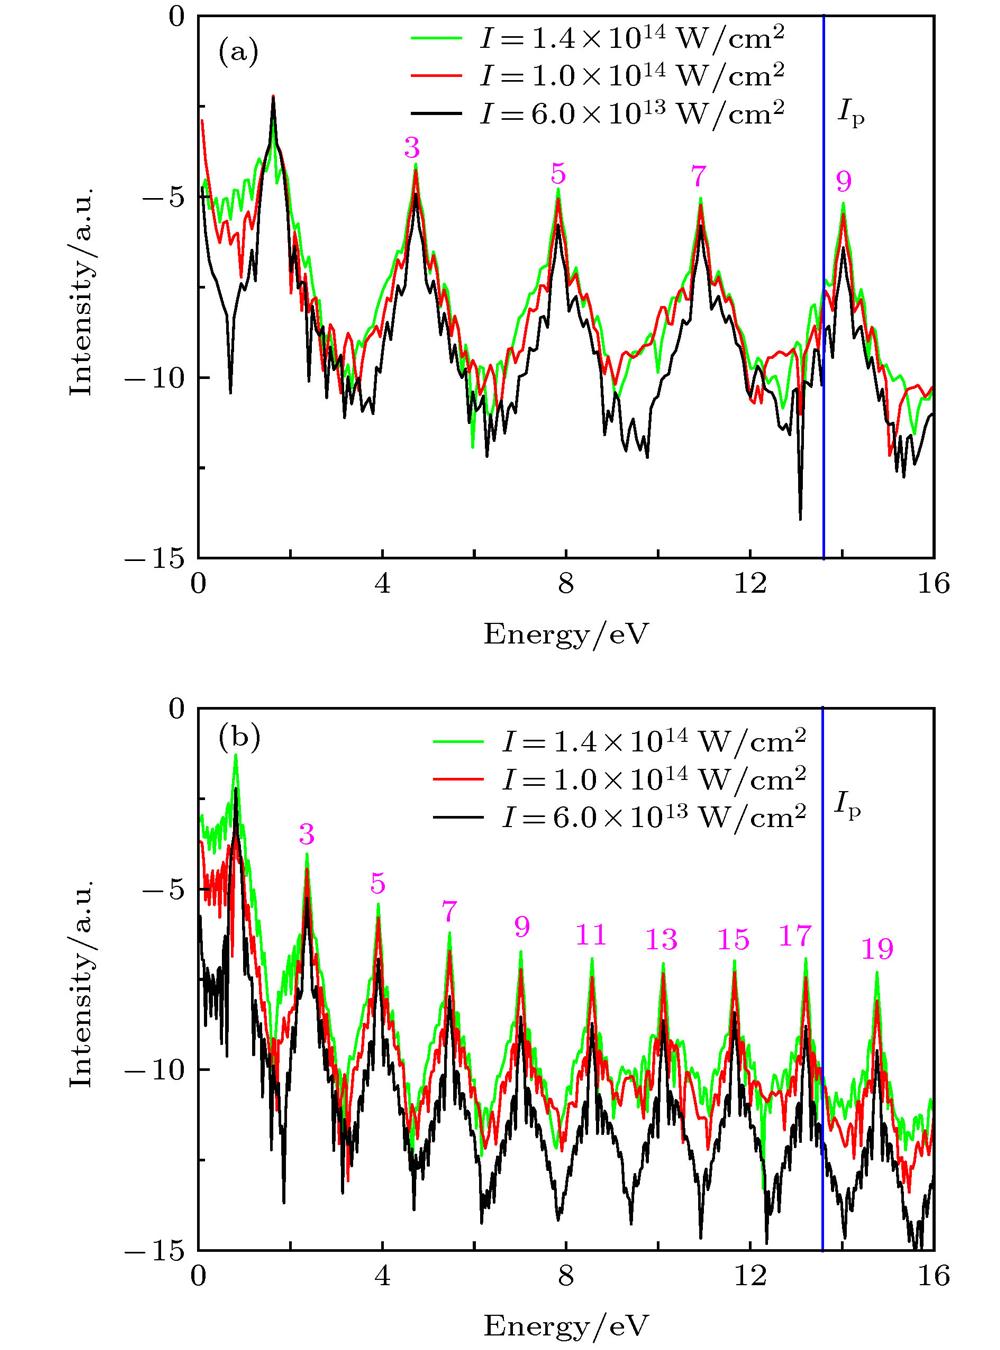 The HHG spectra produced by the hydrogen atom below the ionization threshold: (a) The wavelength is , and the intensity is (black solid line), (red solid line), and(green solid line), the blue lines indicate the ionization energy Ip of hydrogen atom; (b) same as (a), the wavelength is case.